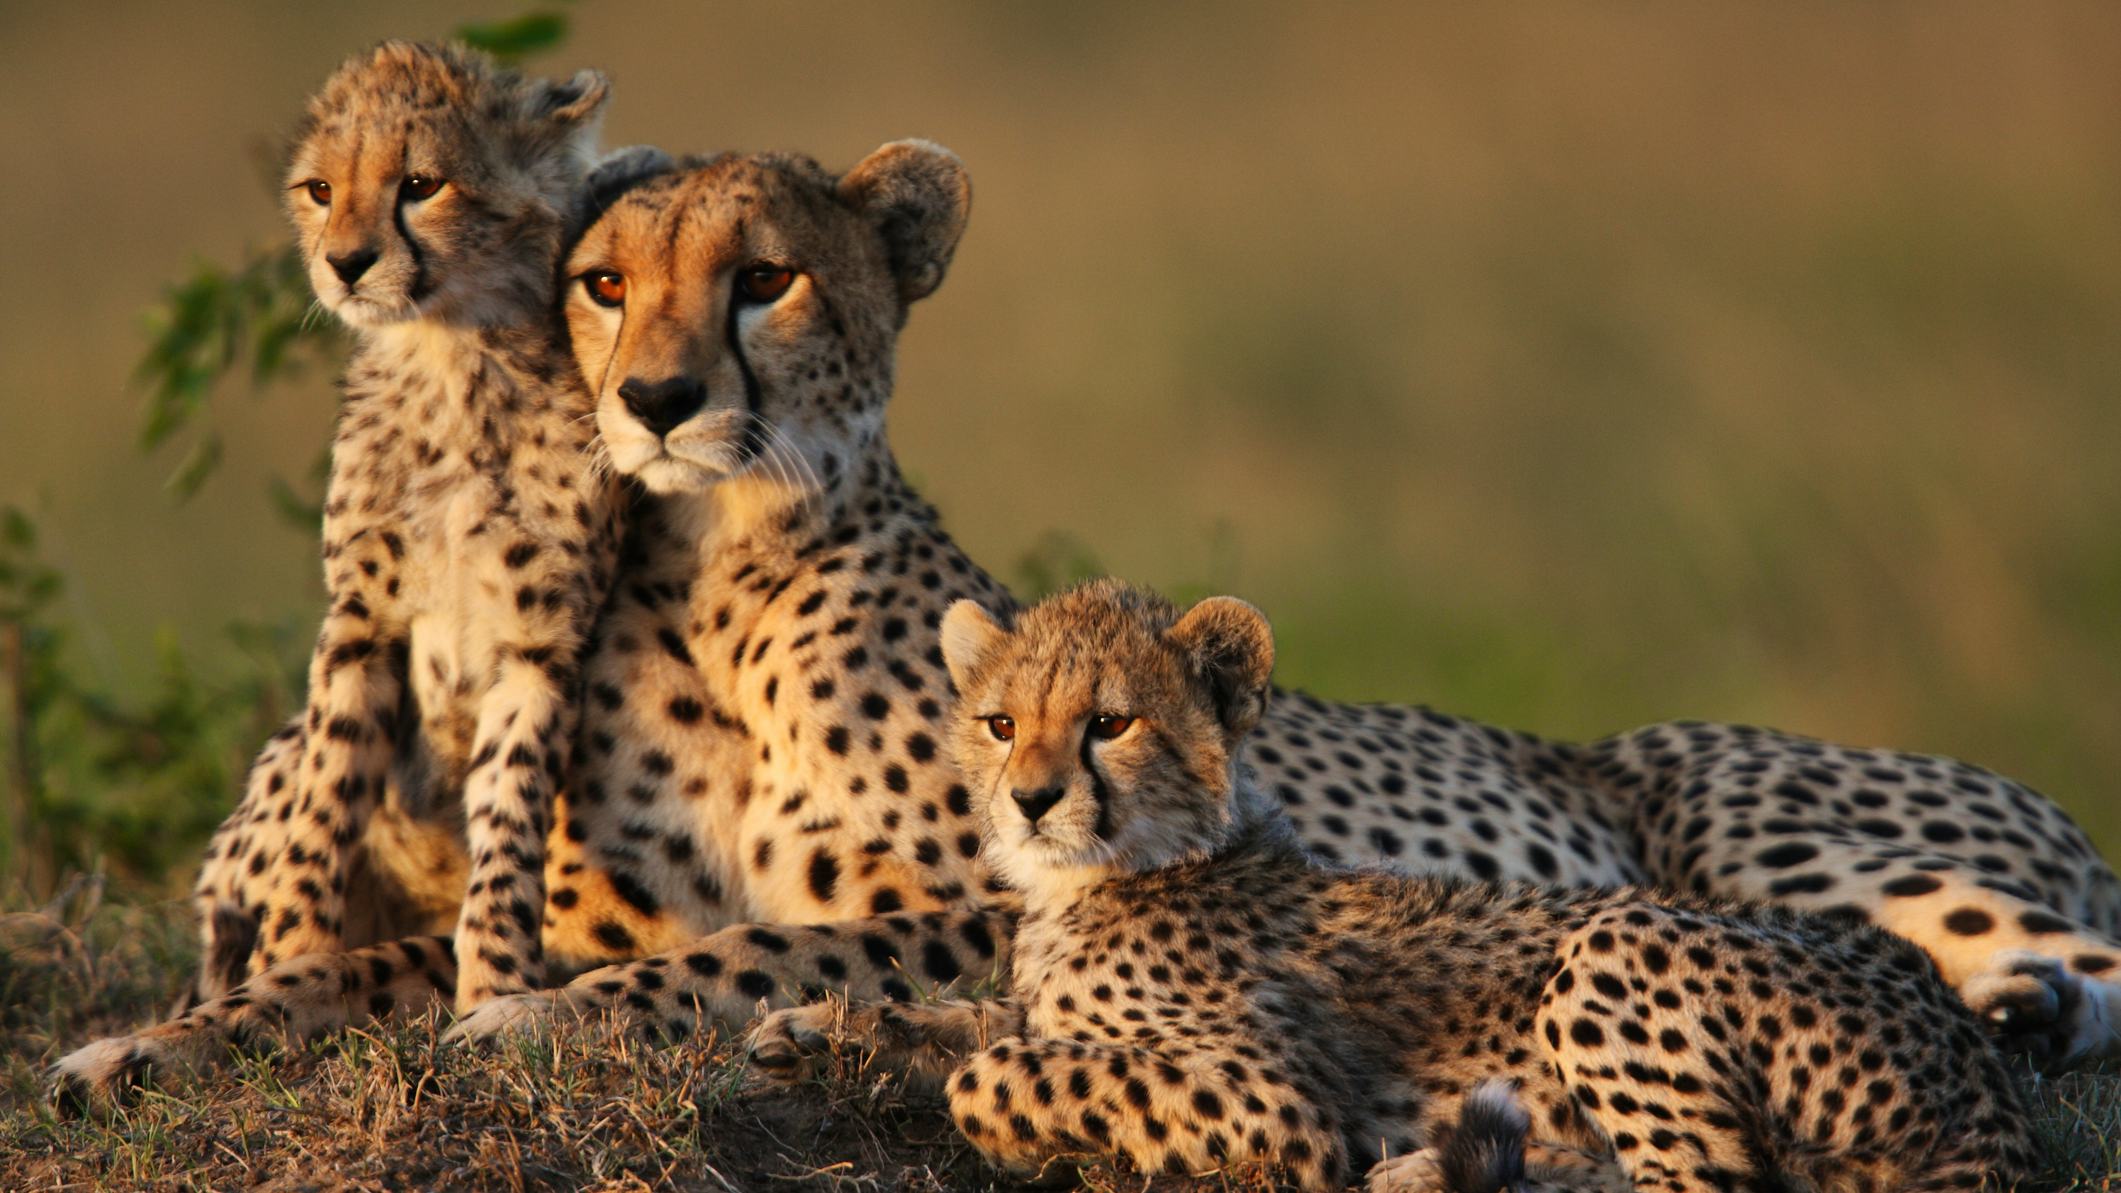 Newsela - Cheetahs could be in danger of going extinct